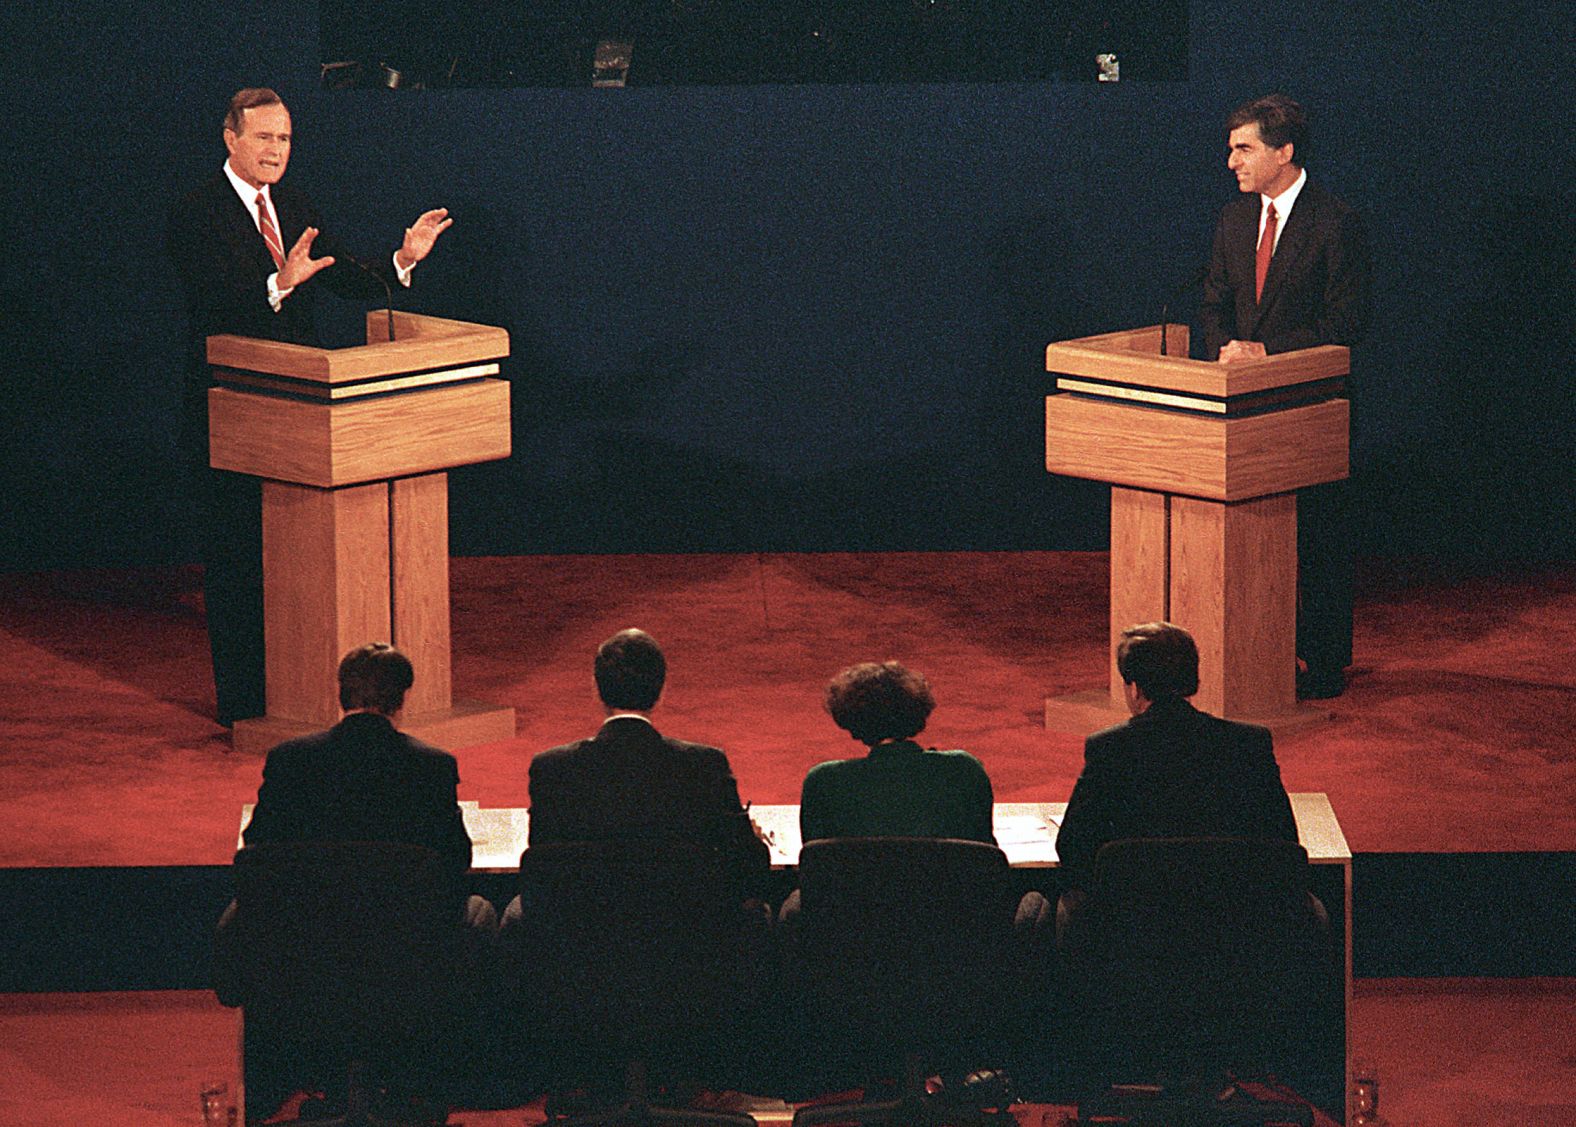 Vice President George H.W. Bush speaks during his first presidential debate with Michael Dukakis in 1988.